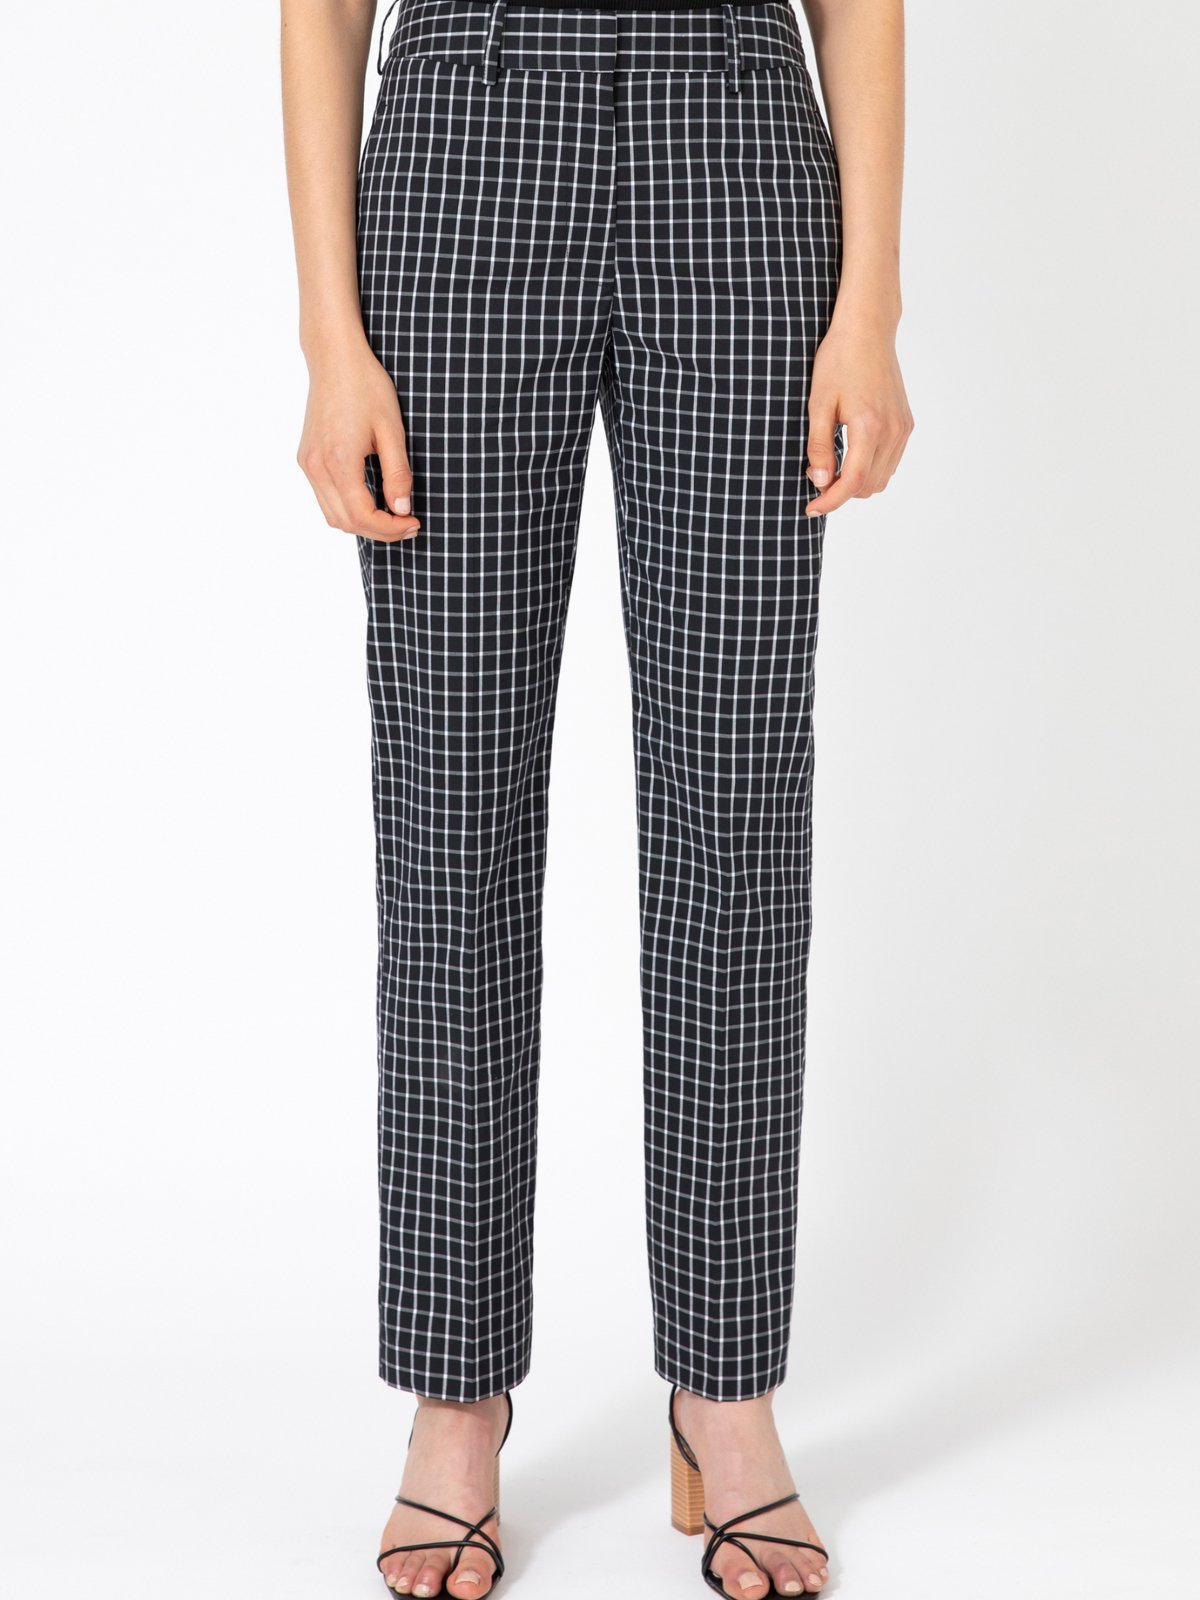 black and white pants checkered